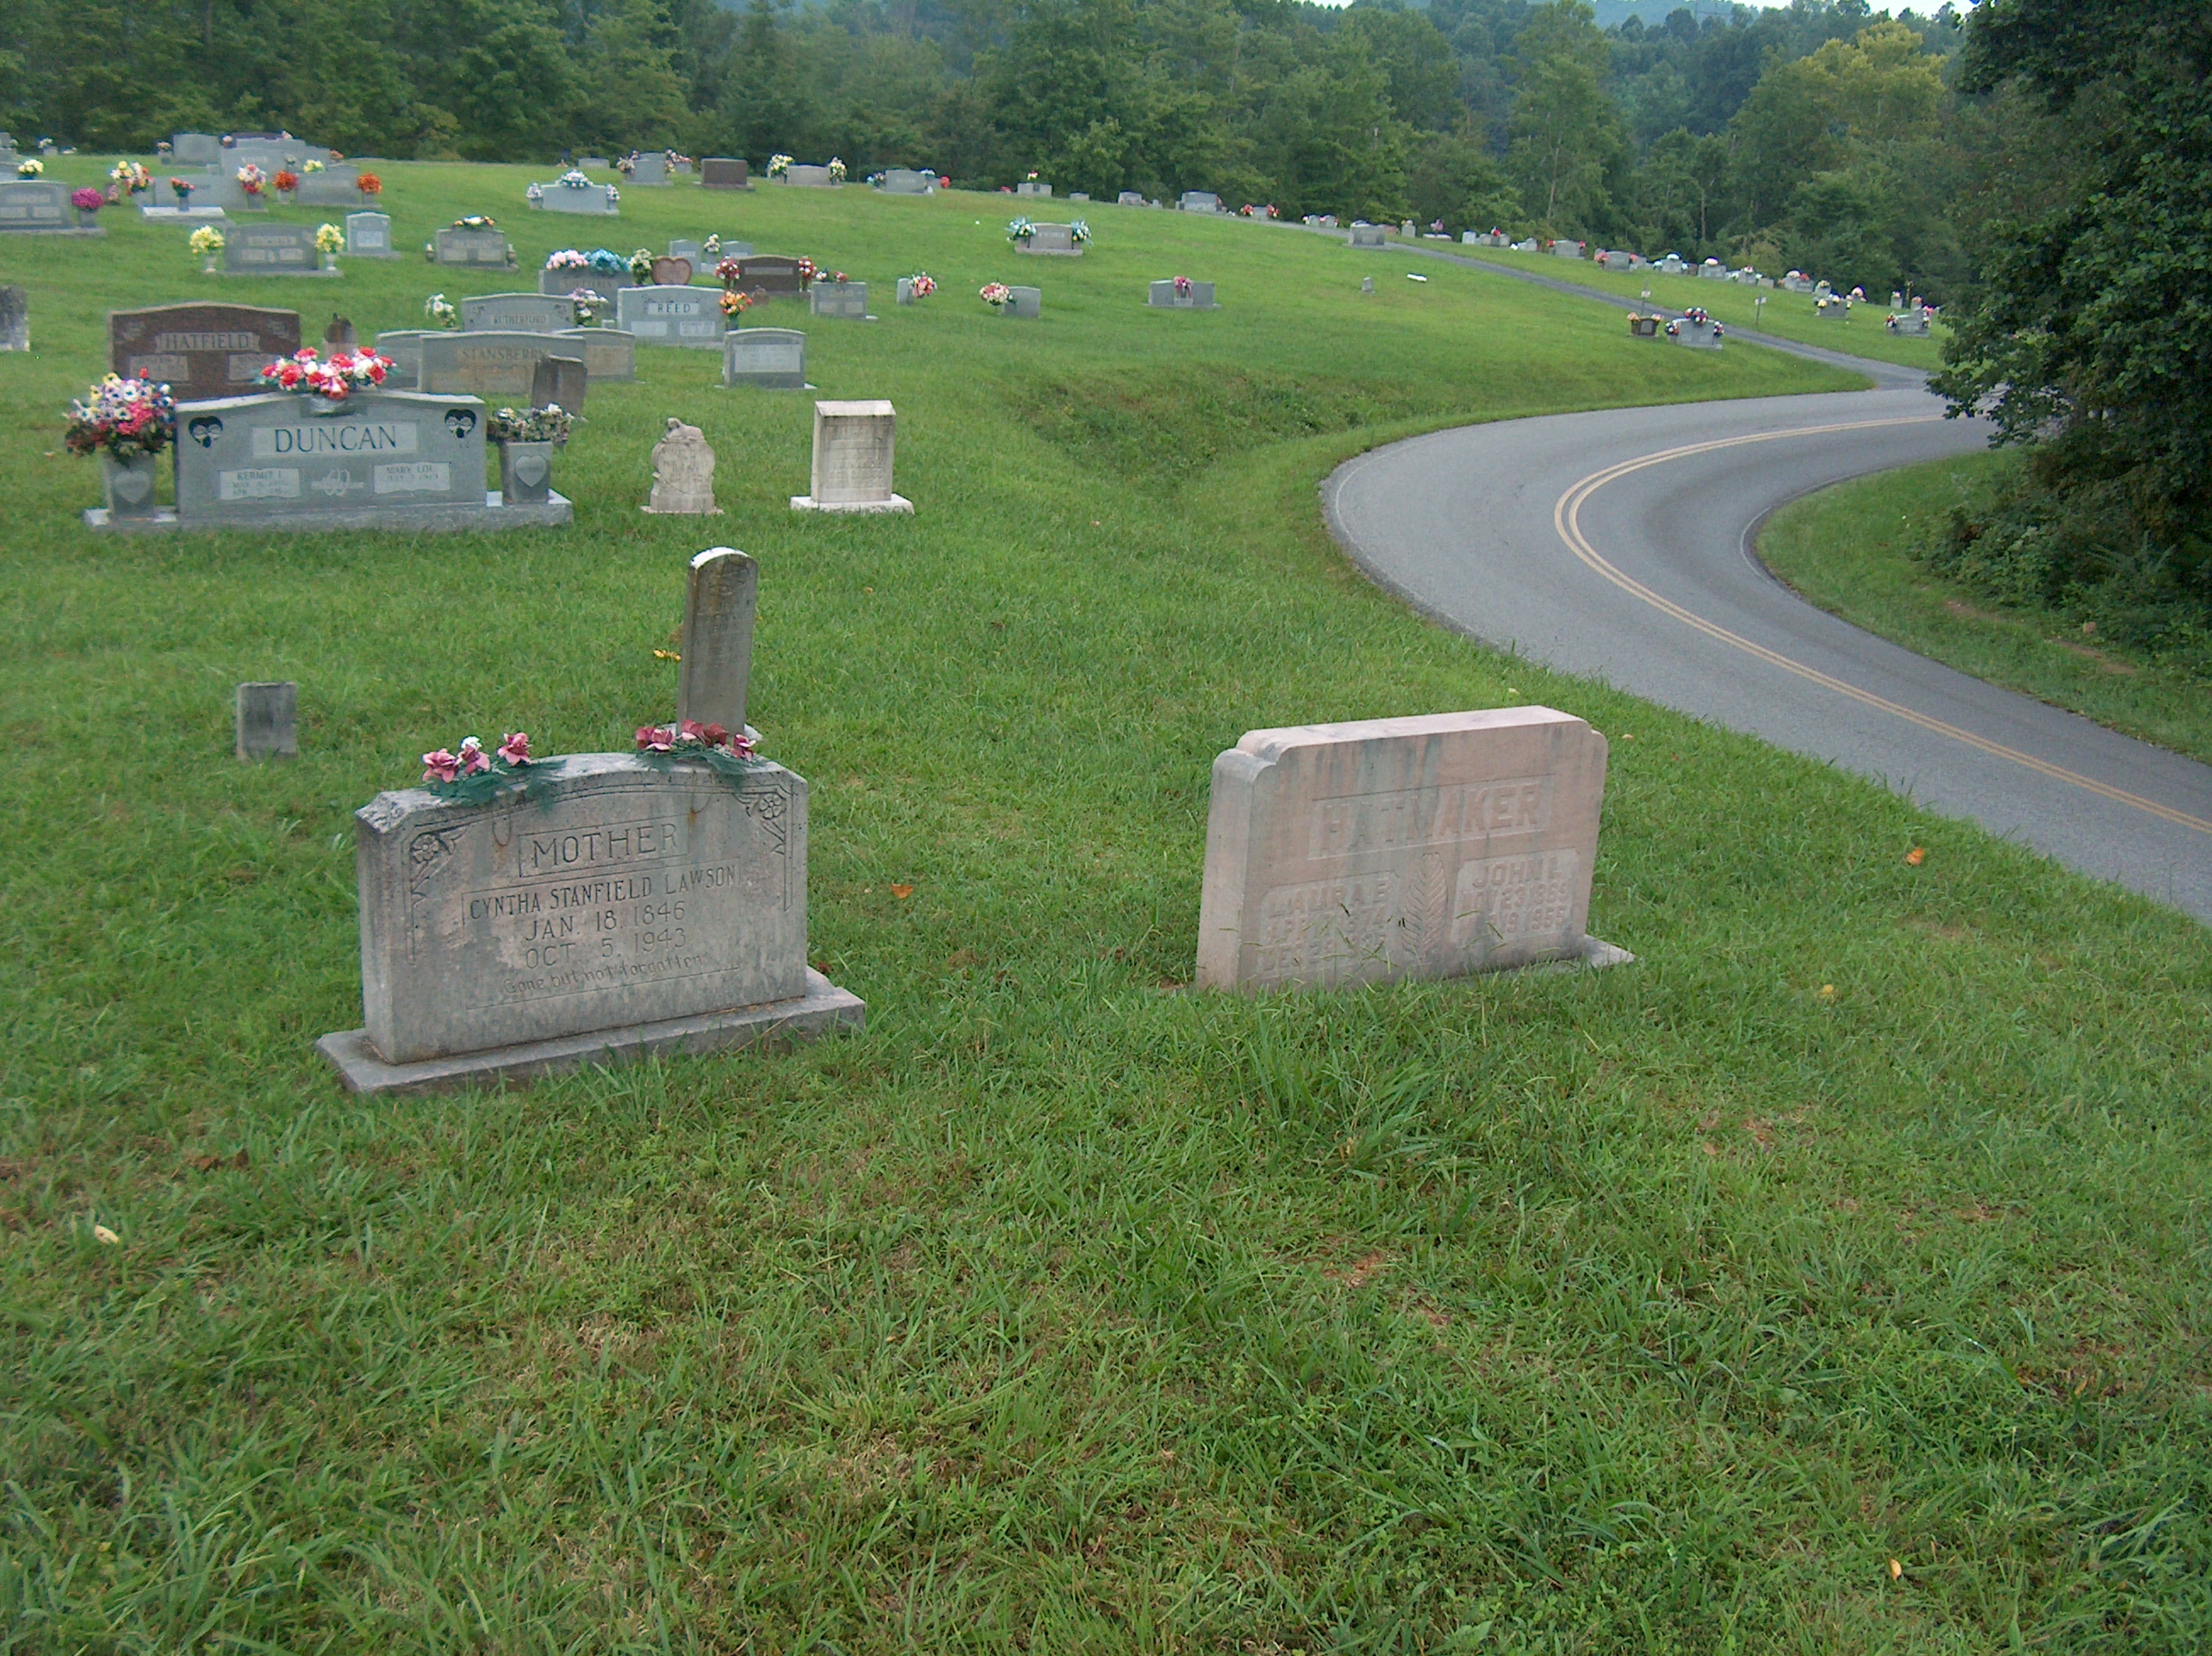 Sometimes family members are buried near each other. In this case, Cyntha is Laura's mother.